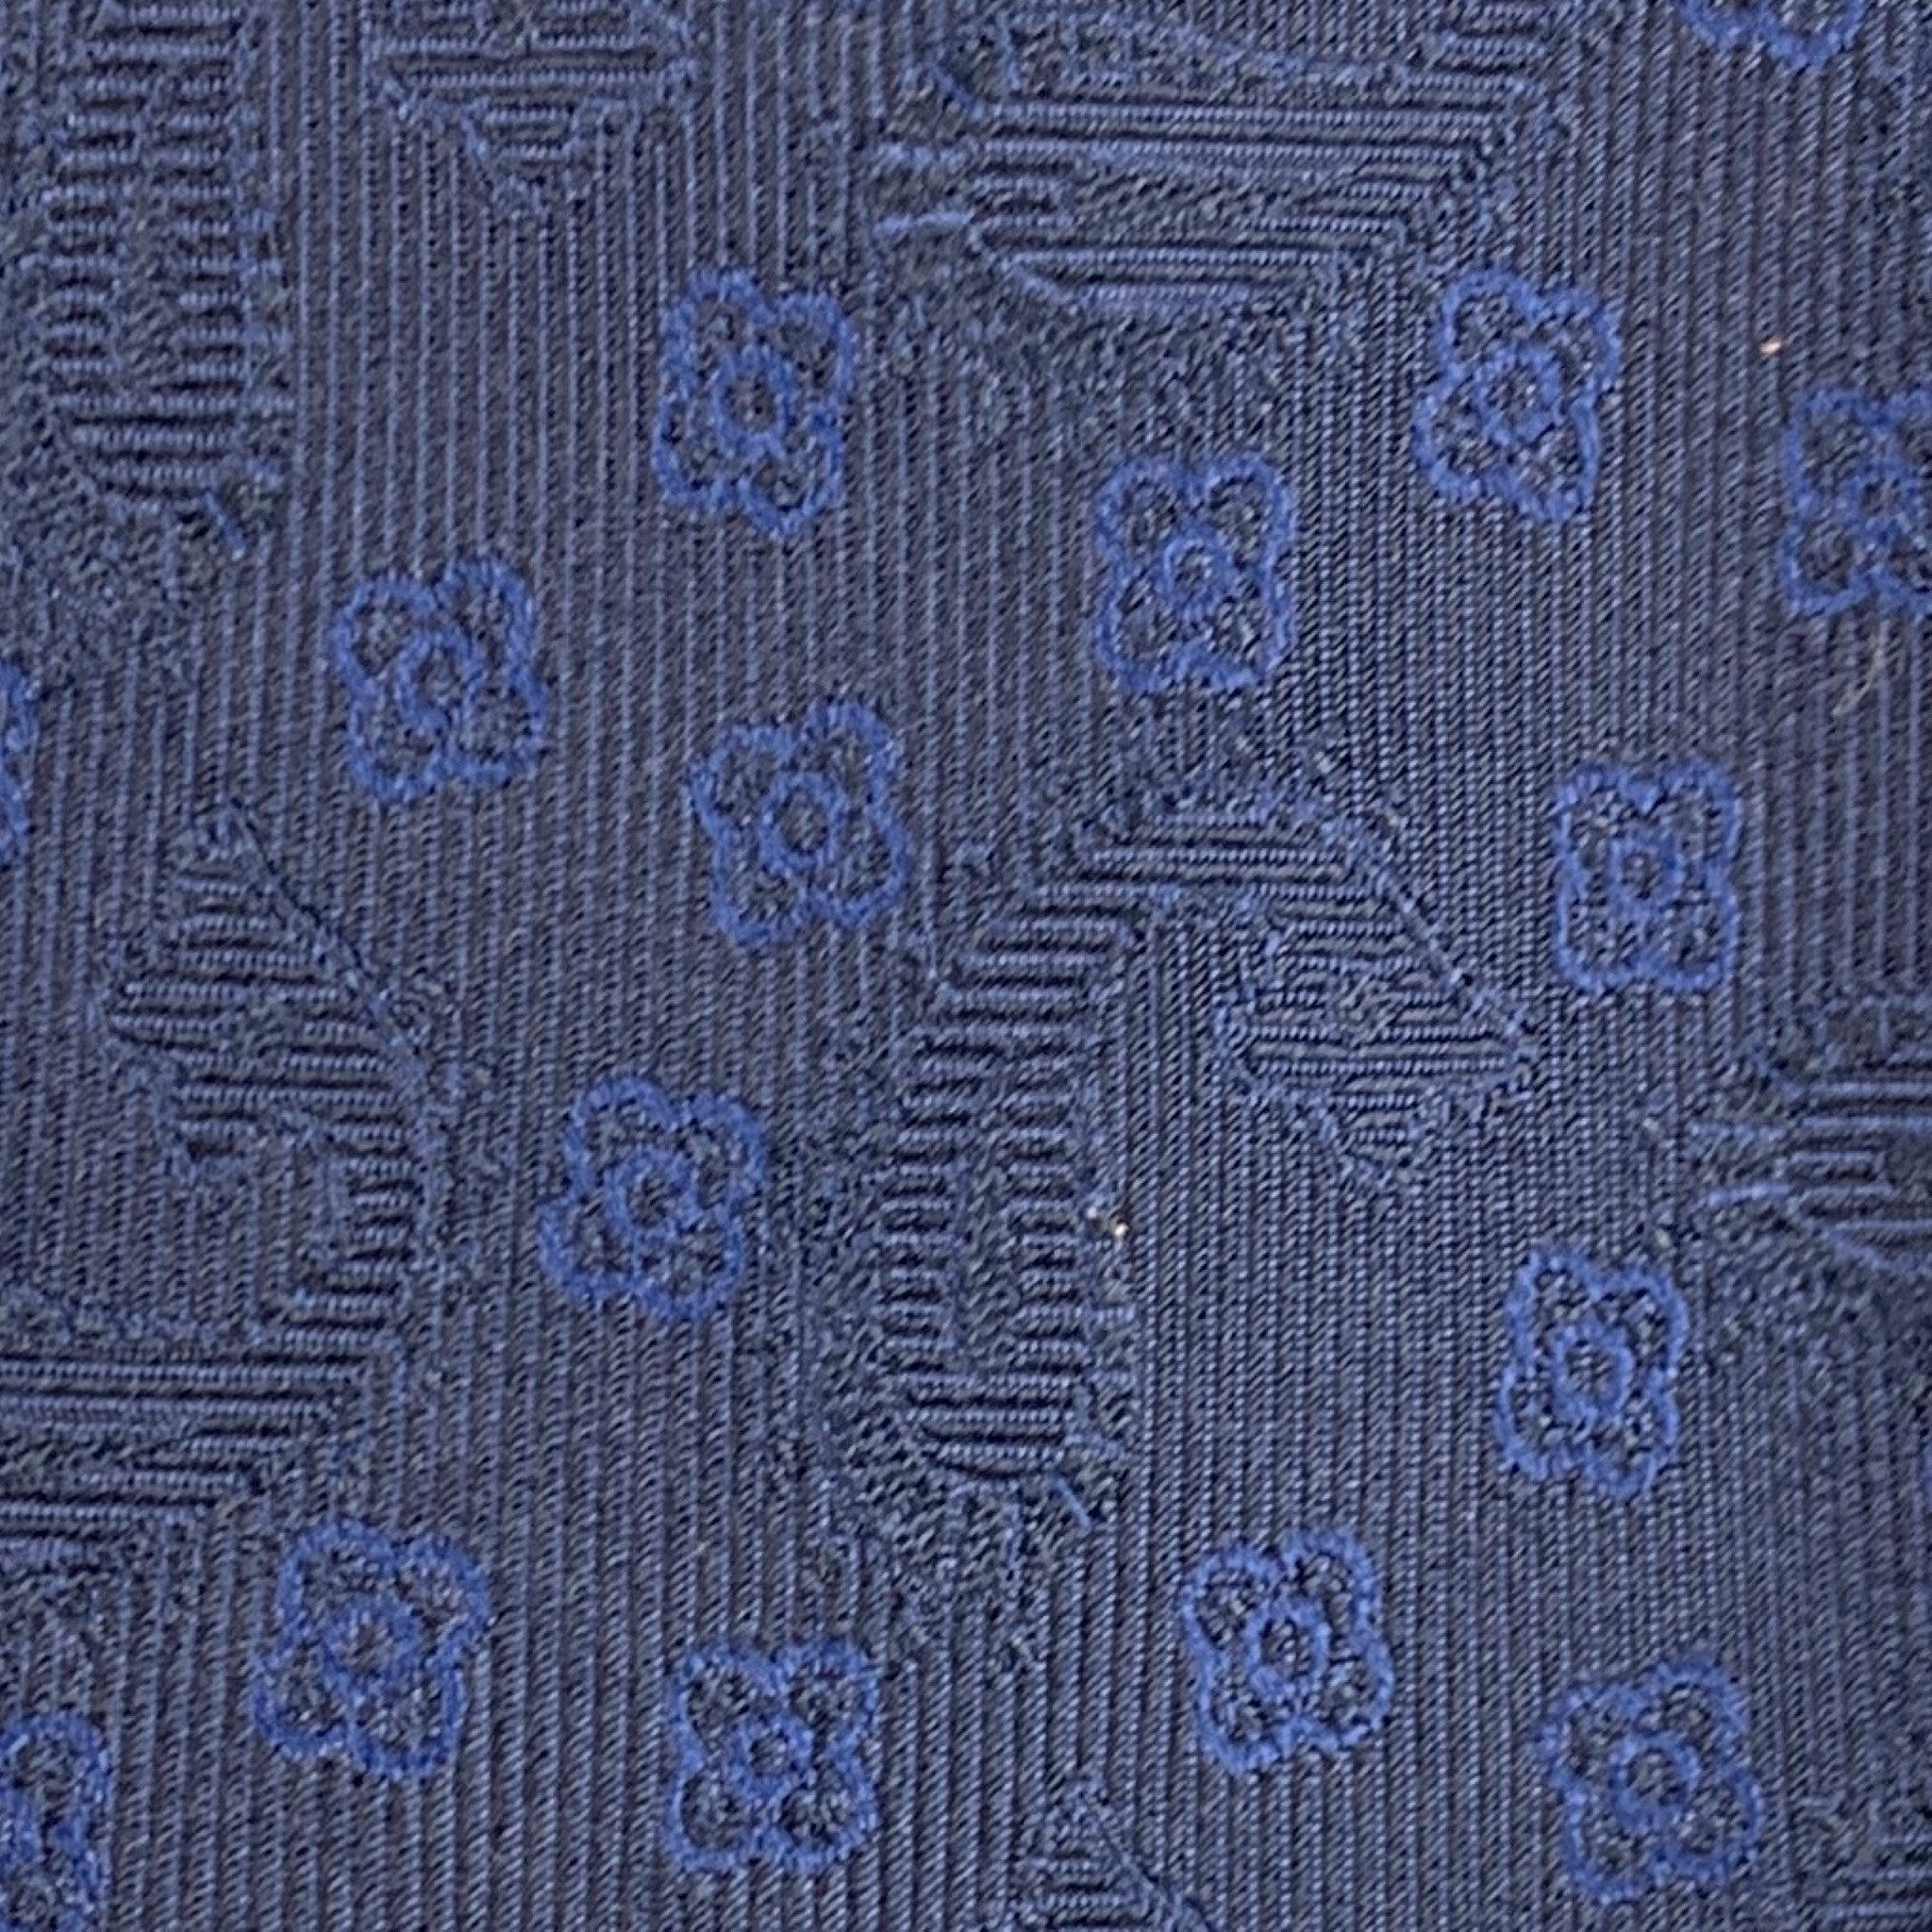 ETRO Navy Black Abstract Floral Silk Tie In Good Condition For Sale In San Francisco, CA